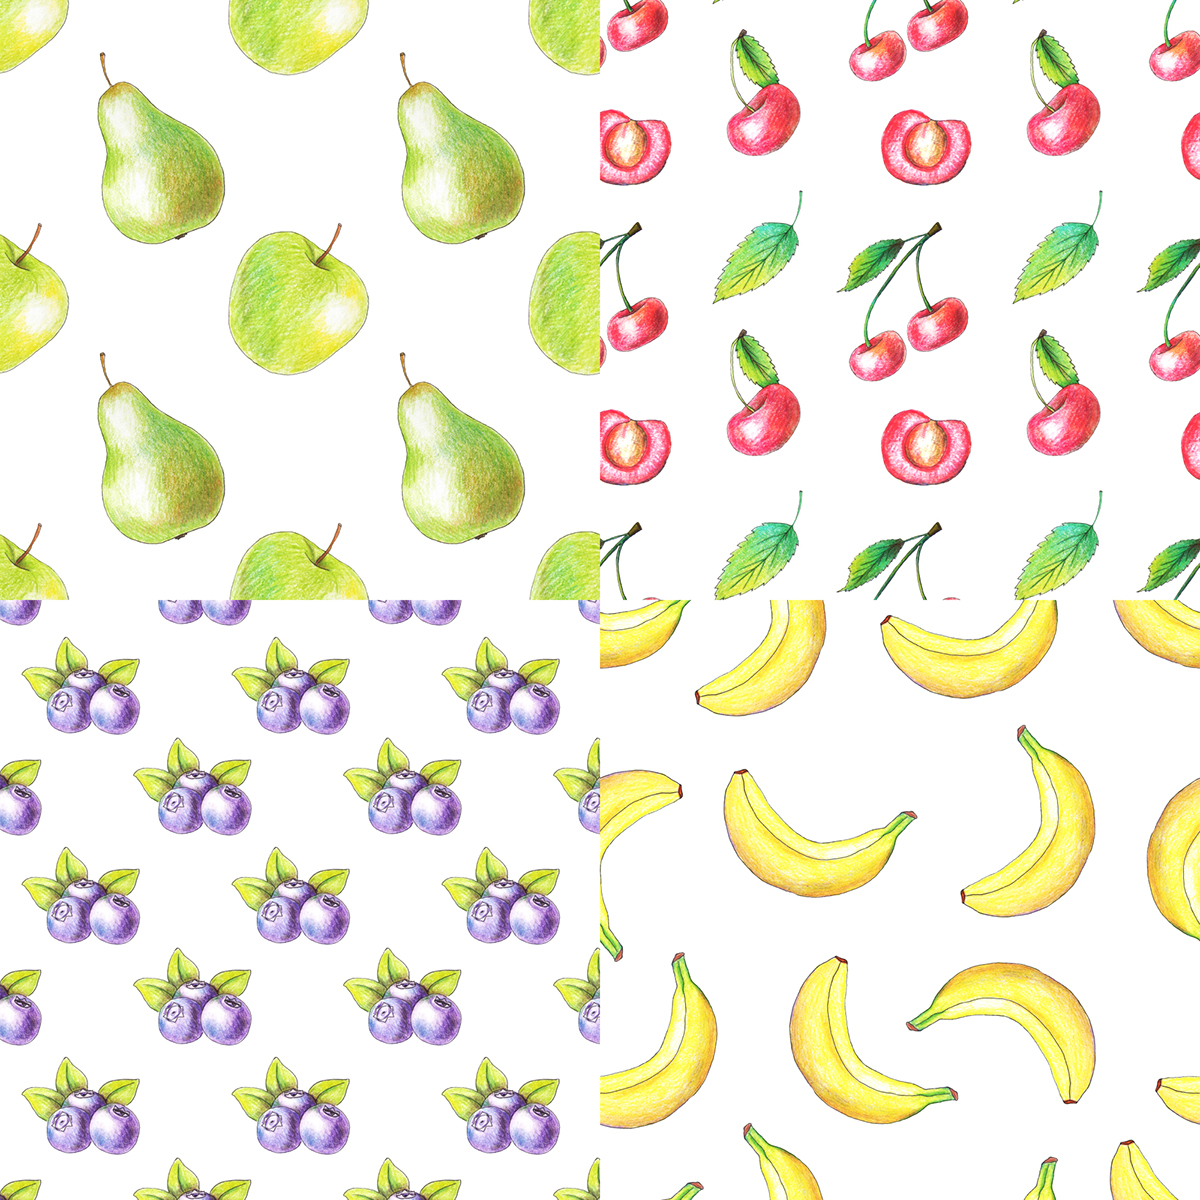 Original fruits drawn by color pencils on Behance